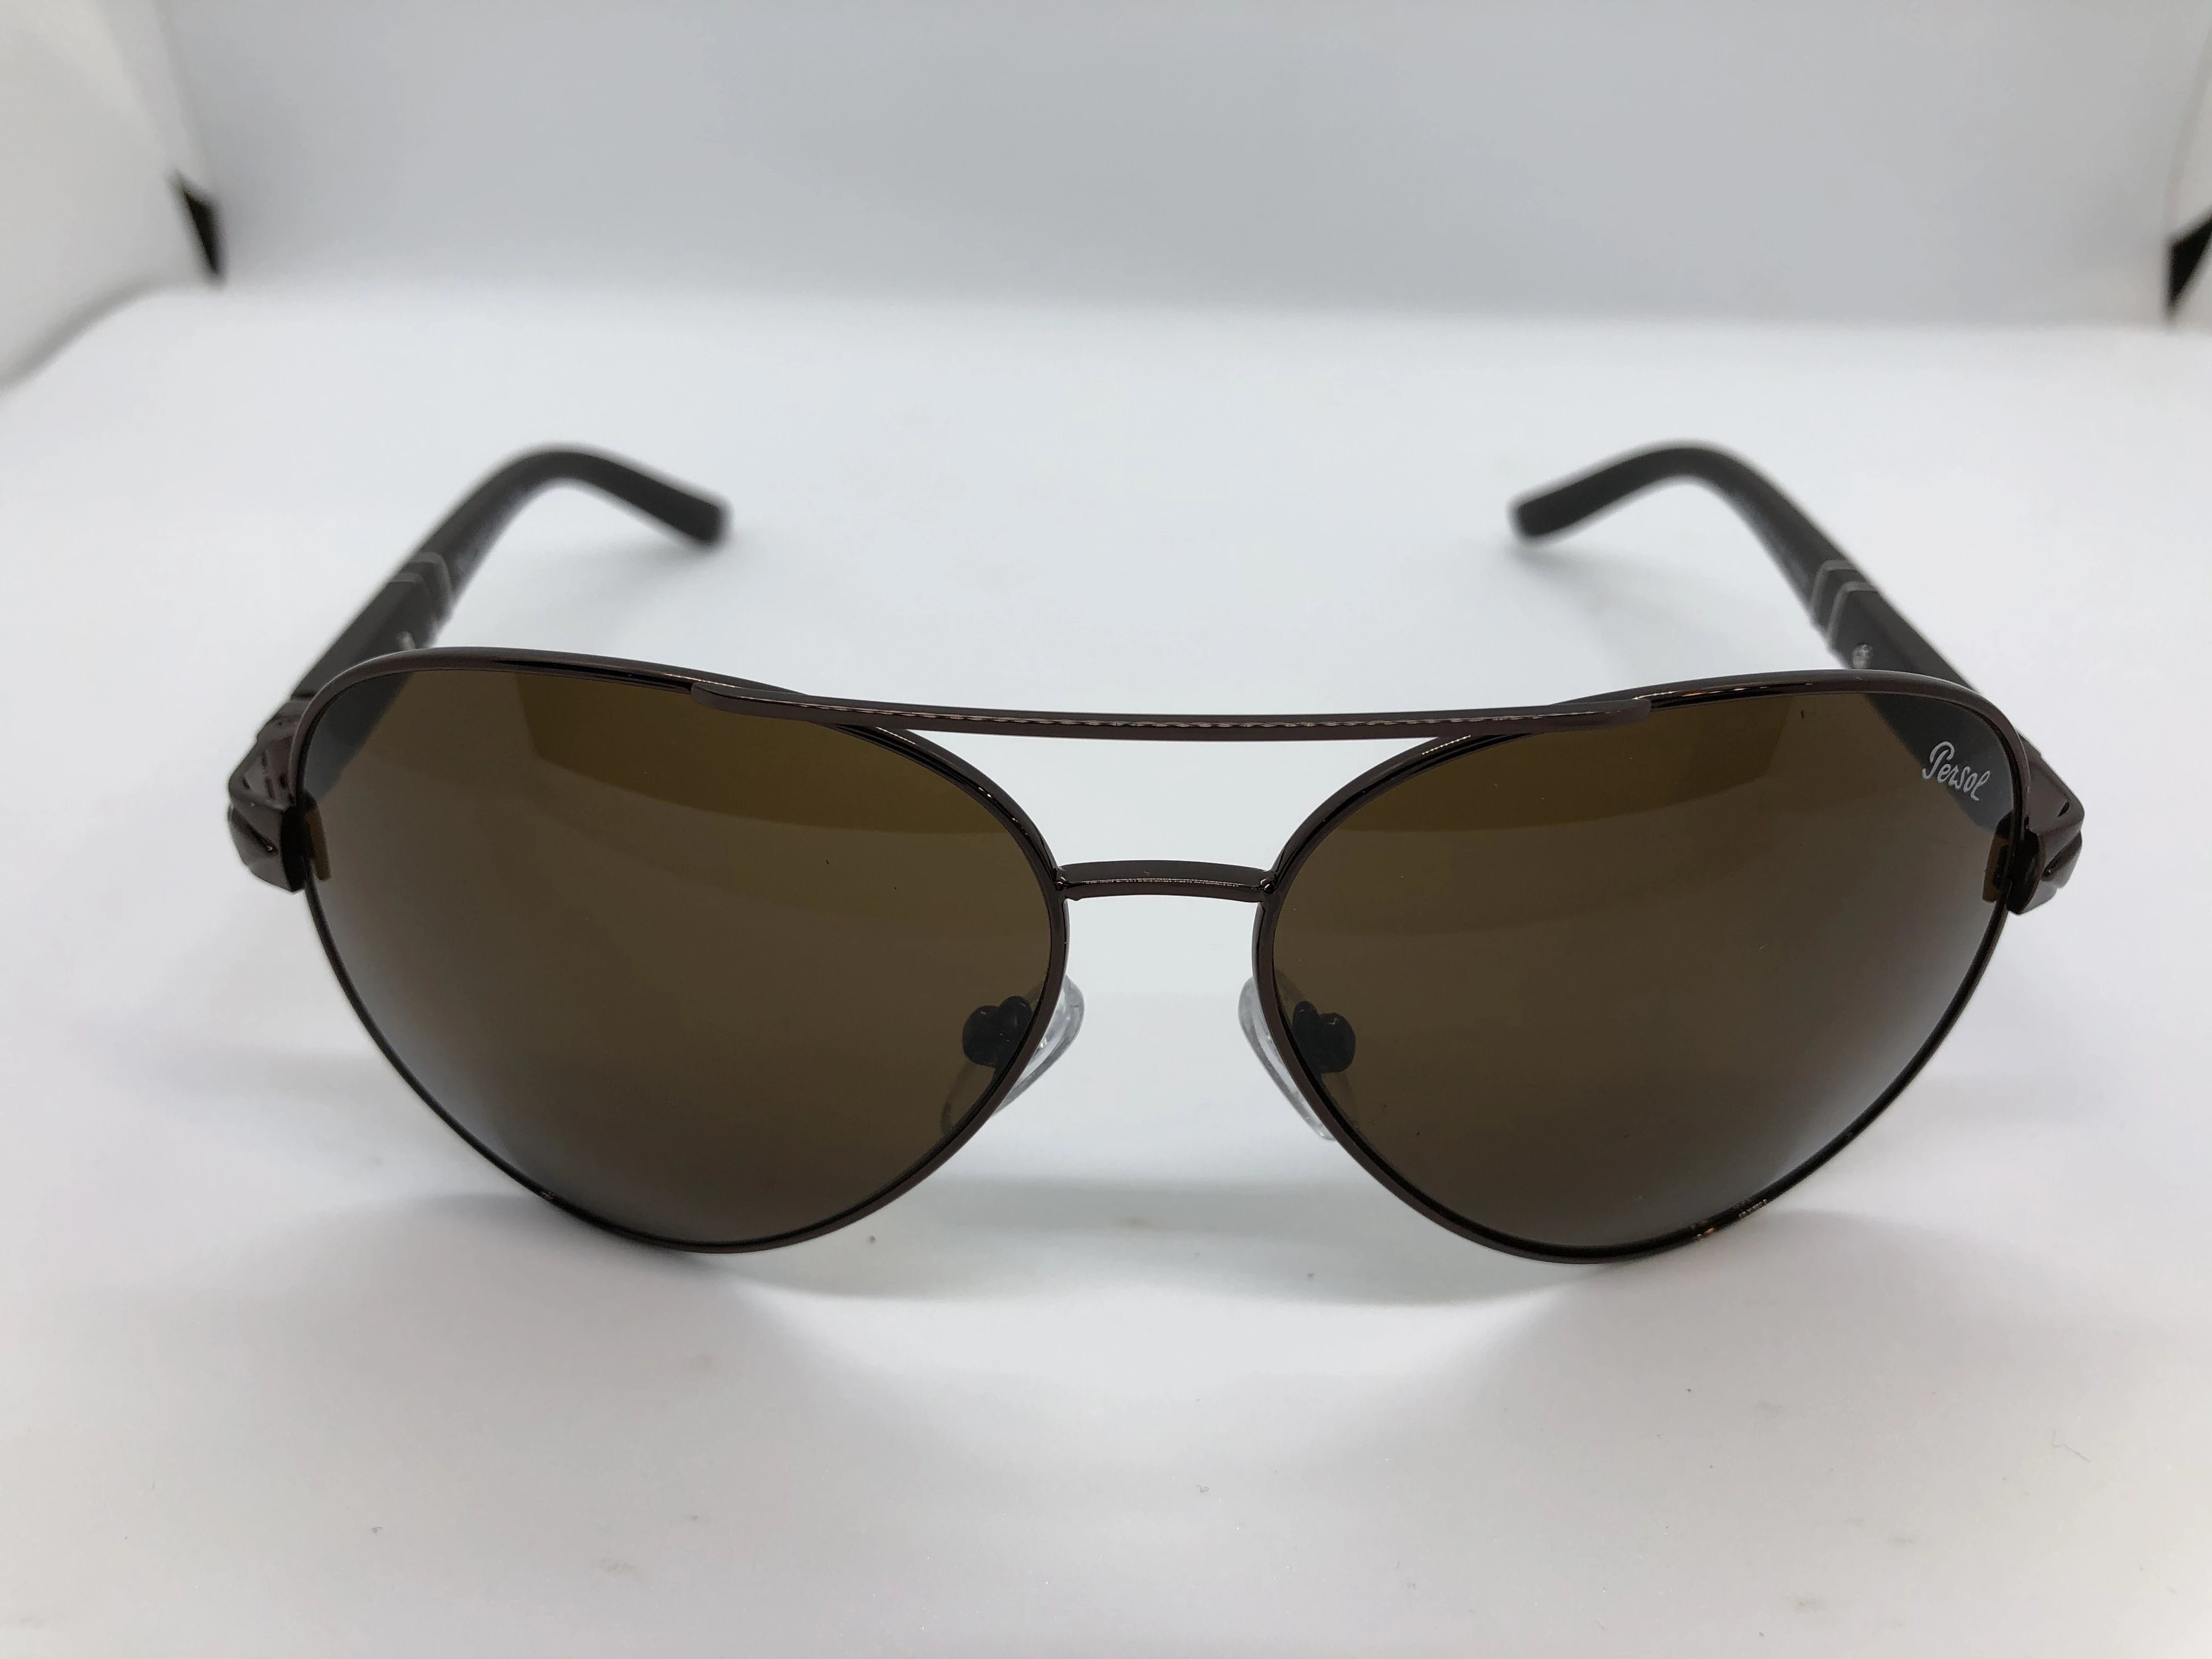 Sunglasses - from Persol - with dark brown metal frame - and dark brown lenses - and dark brown polycarbonate arm - for men